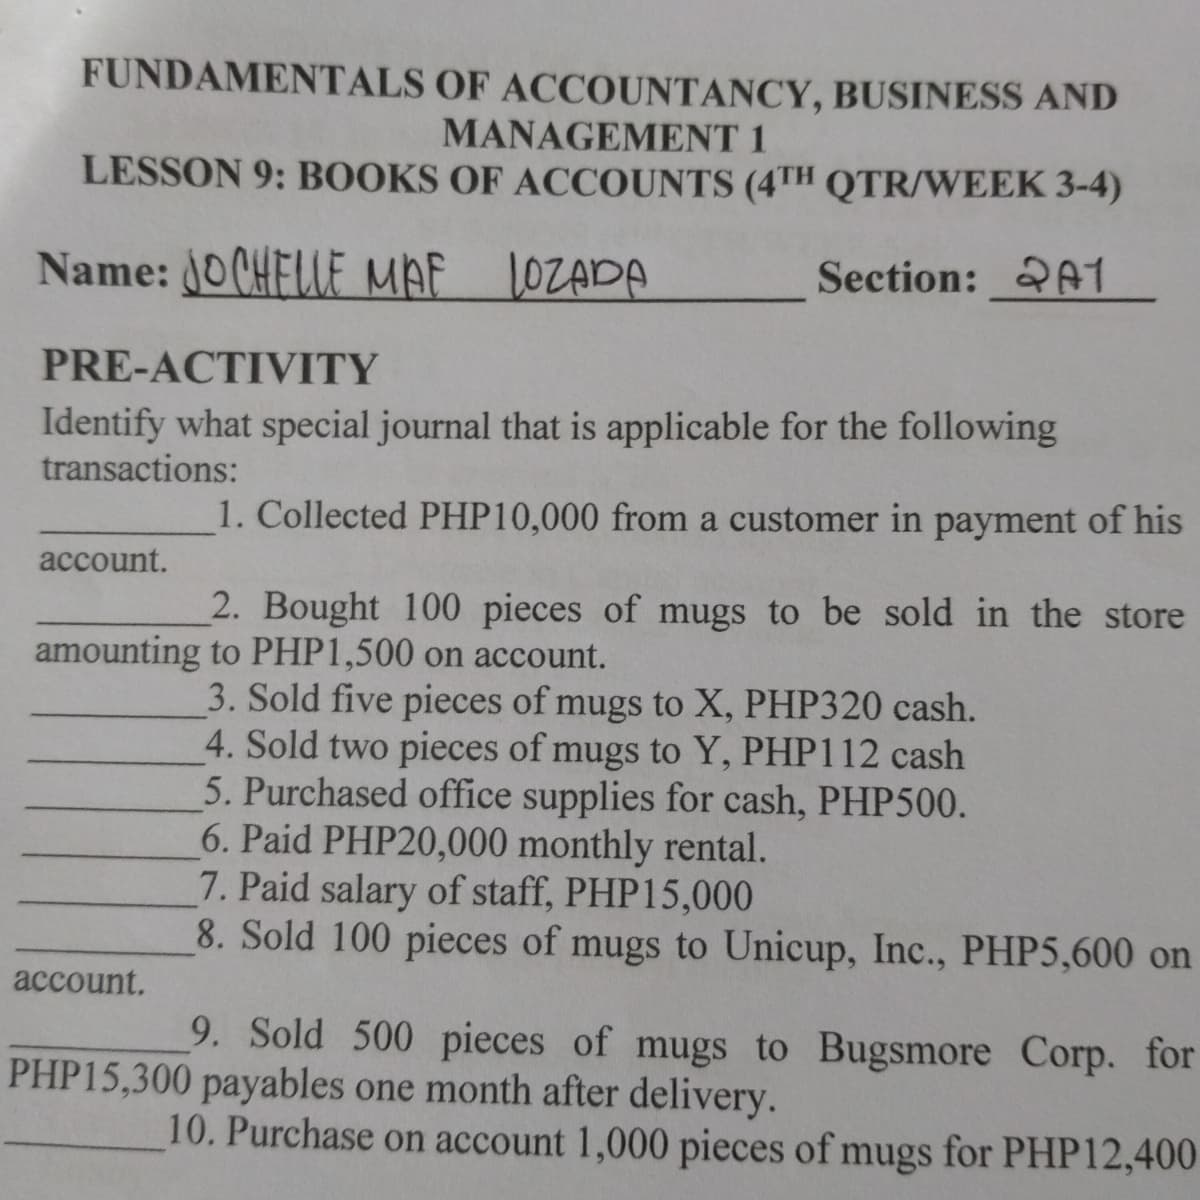 FUNDAMENTALS OF ACCOUNTANCY, BUSINESS AND
MANAGEMENT 1
LESSON 9: BOOKS OF ACCOUNTS (4TH QTR/WEEK 3-4)
Name: 0 CHELLE MAF
1OZADA
Section: 21
PRE-ACTIVITY
Identify what special journal that is applicable for the following
transactions:
1. Collected PHP10,000 from a customer in payment of his
account.
2. Bought 100 pieces of mugs to be sold in the store
amounting to PHP1,500 on account.
3. Sold five pieces of mugs to X, PHP320 cash.
4. Sold two pieces of mugs to Y, PHP112 cash
5. Purchased office supplies for cash, PHP500.
6. Paid PHP20,000 monthly rental.
7. Paid salary of staff, PHP15,000
8. Sold 100 pieces of mugs to Unicup, Inc., PHP5,600 on
account.
9. Sold 500 pieces of mugs to Bugsmore Corp. for
PHP15,300 payables one month after delivery.
10. Purchase on account 1,000 pieces of mugs for PHP12,400
